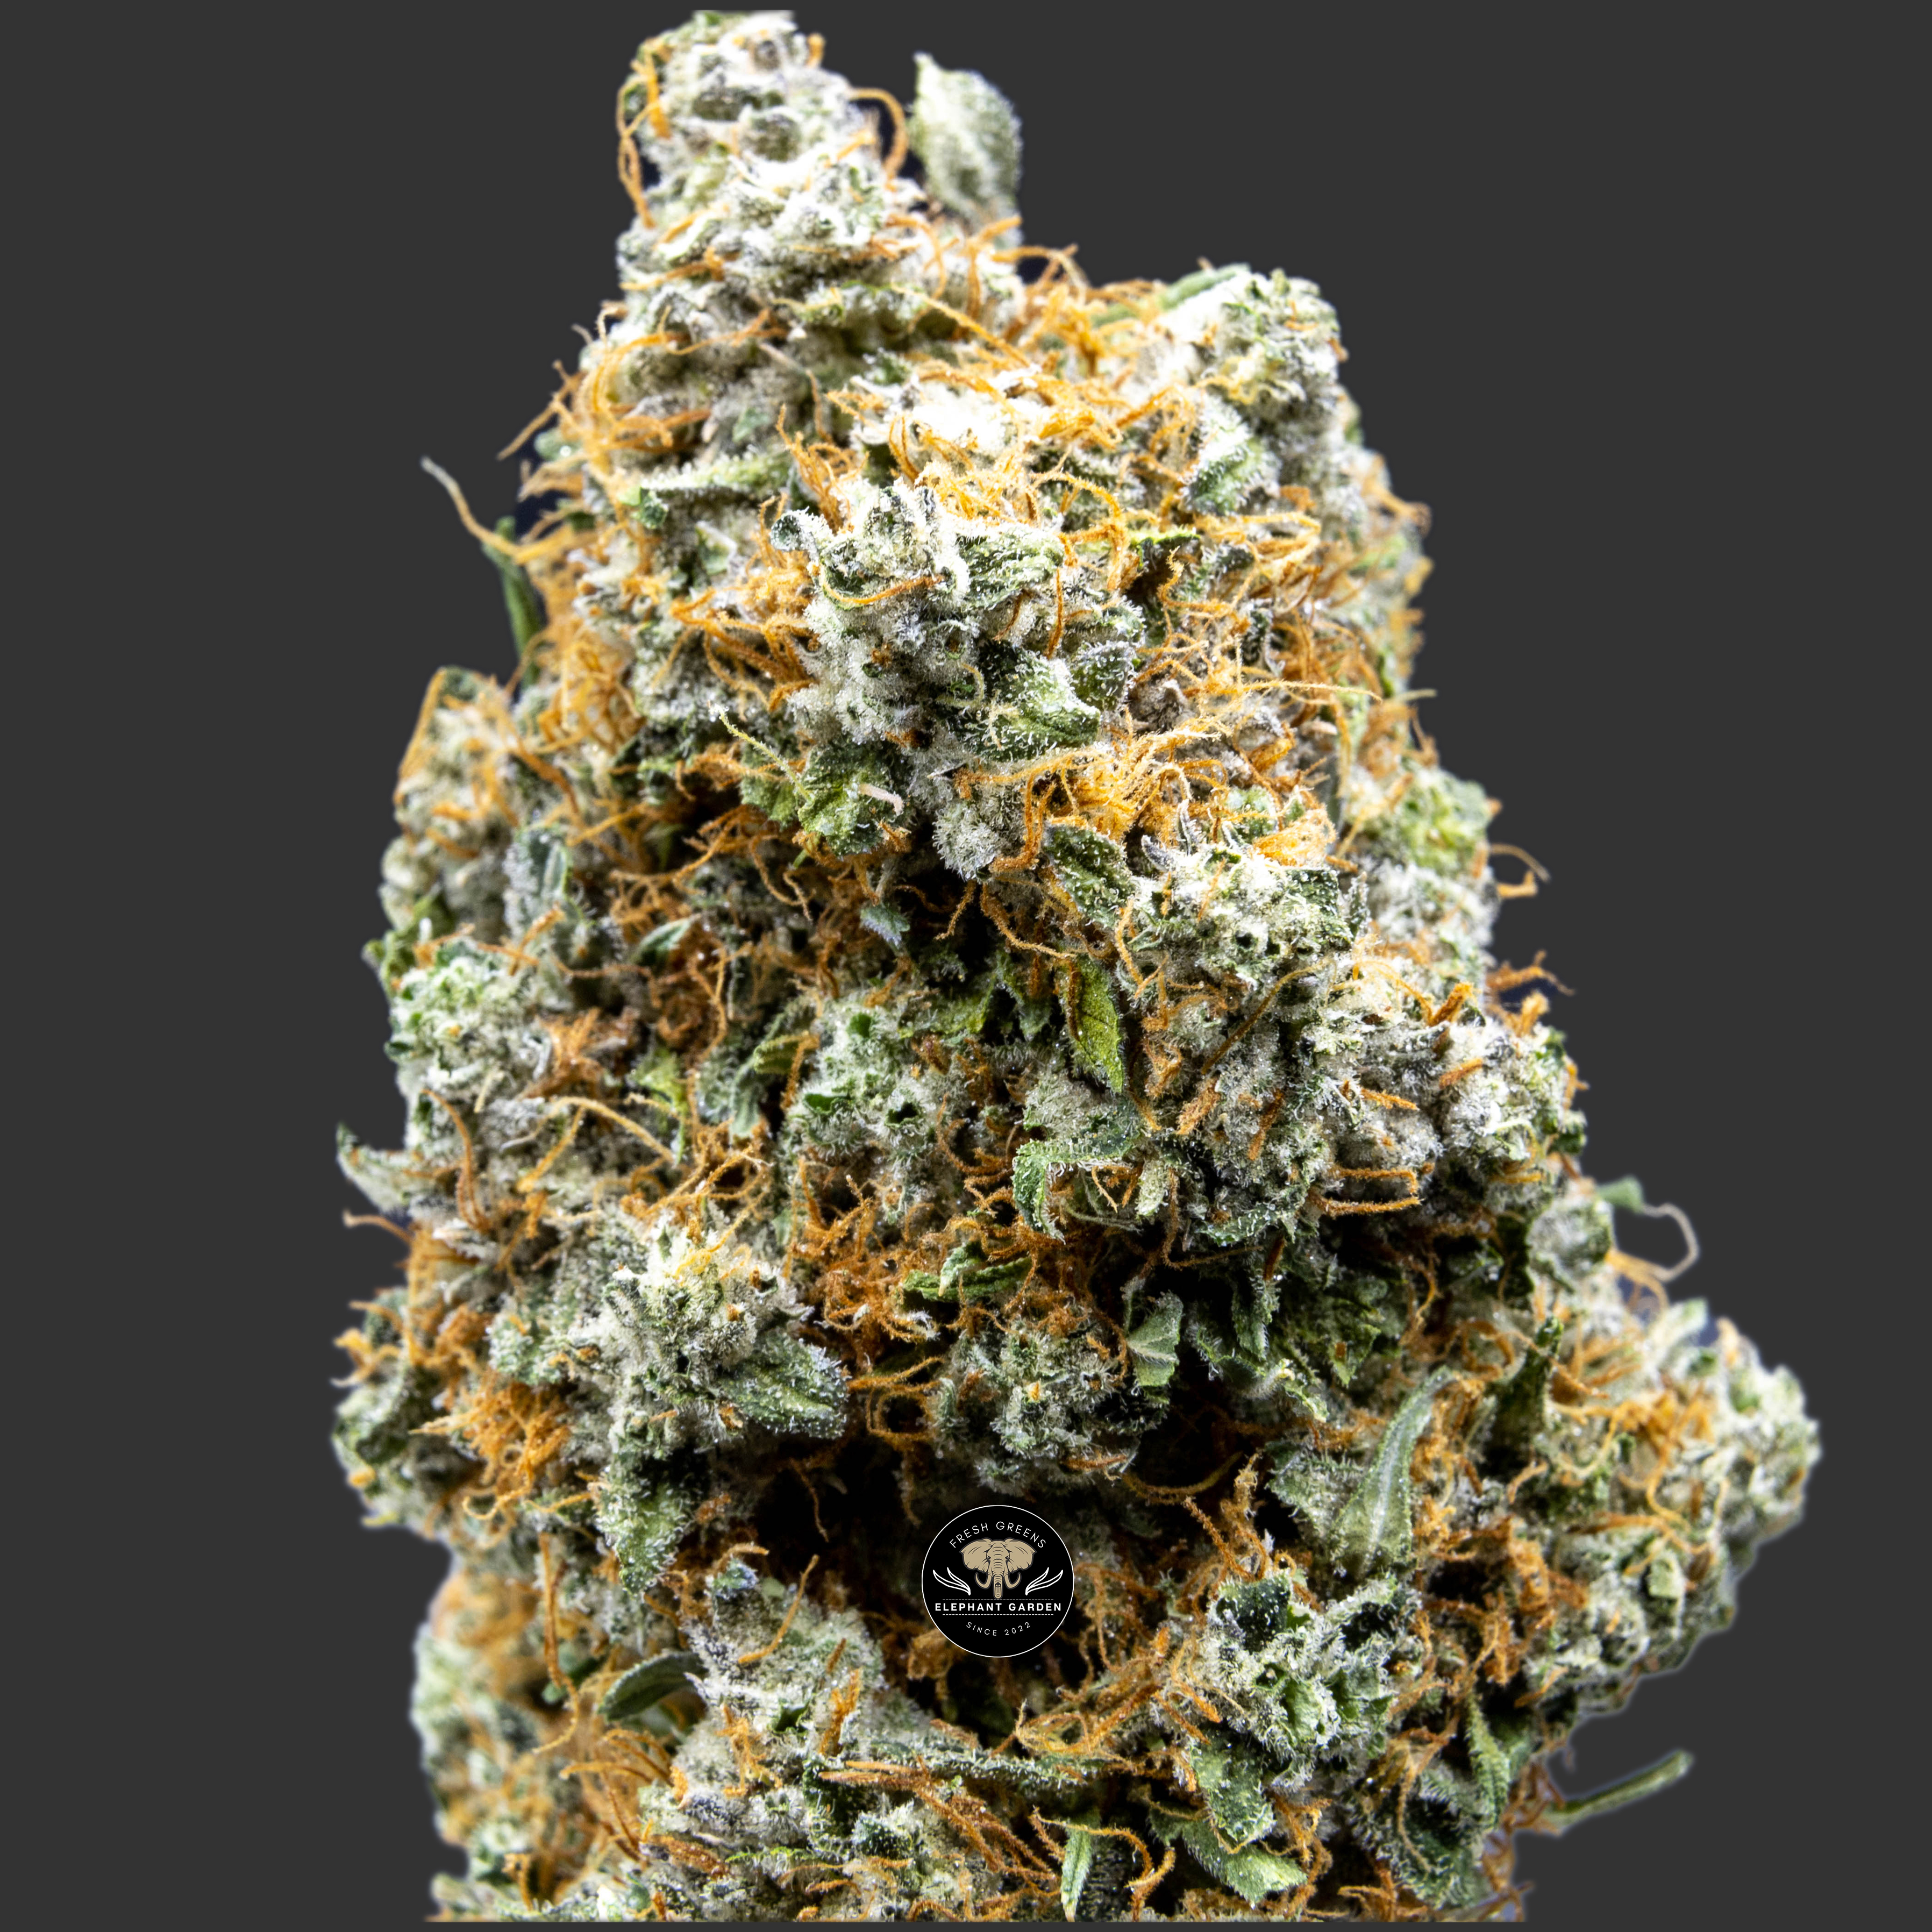 Buy Tahoe OG at Elephant Garden Co Weed Dispensary Online Canada Close